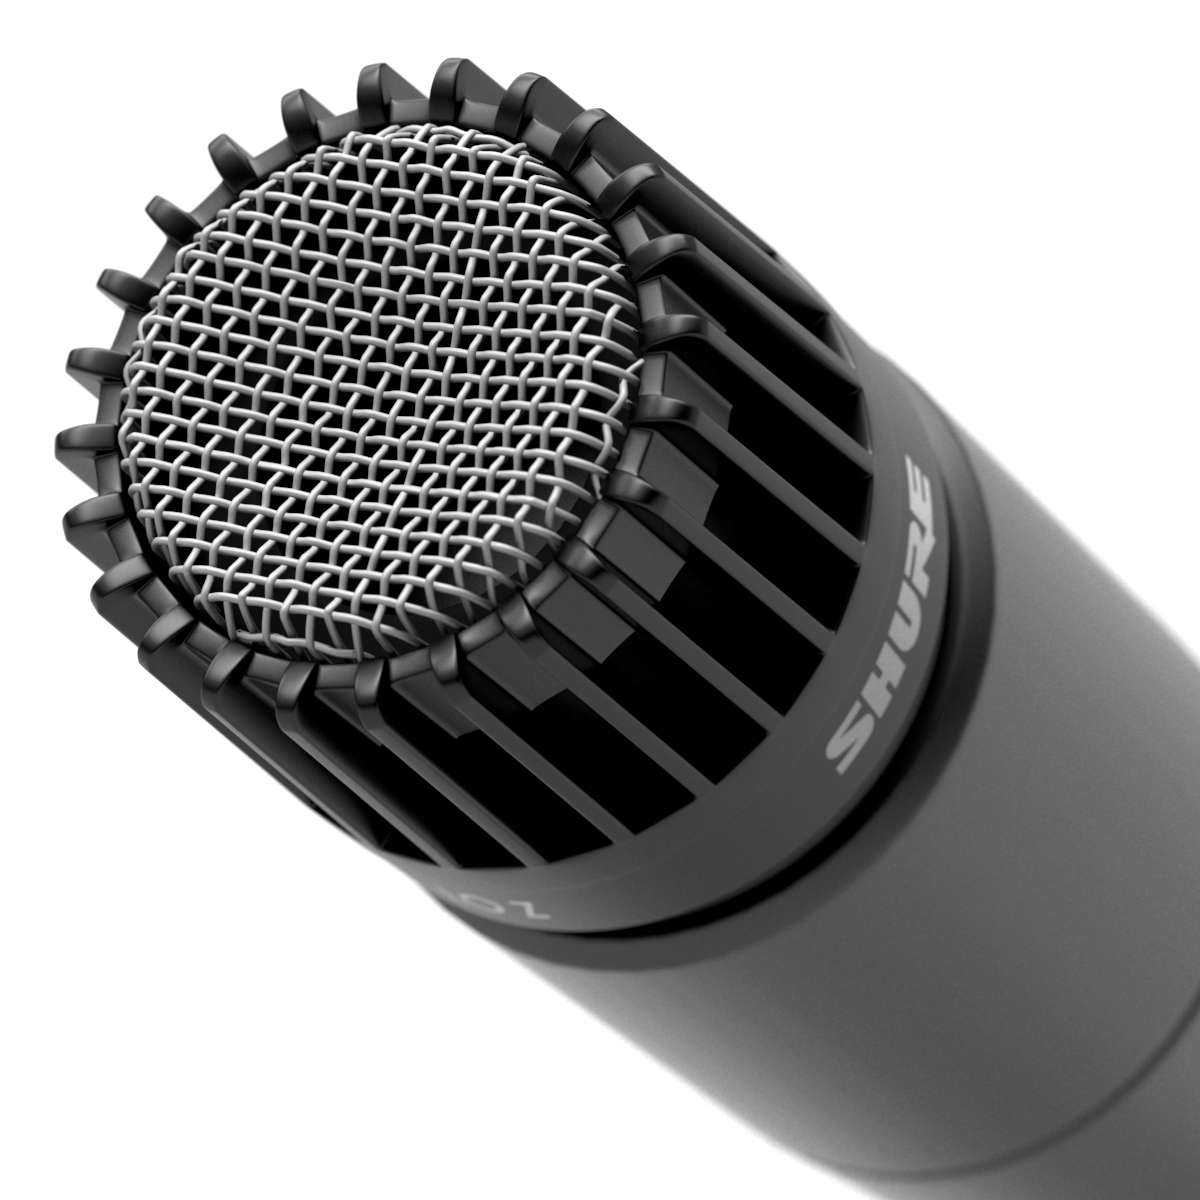 microphone 3D model 3ds max Dynamic recording Render Shure sm57 studio V-ray vocal voice